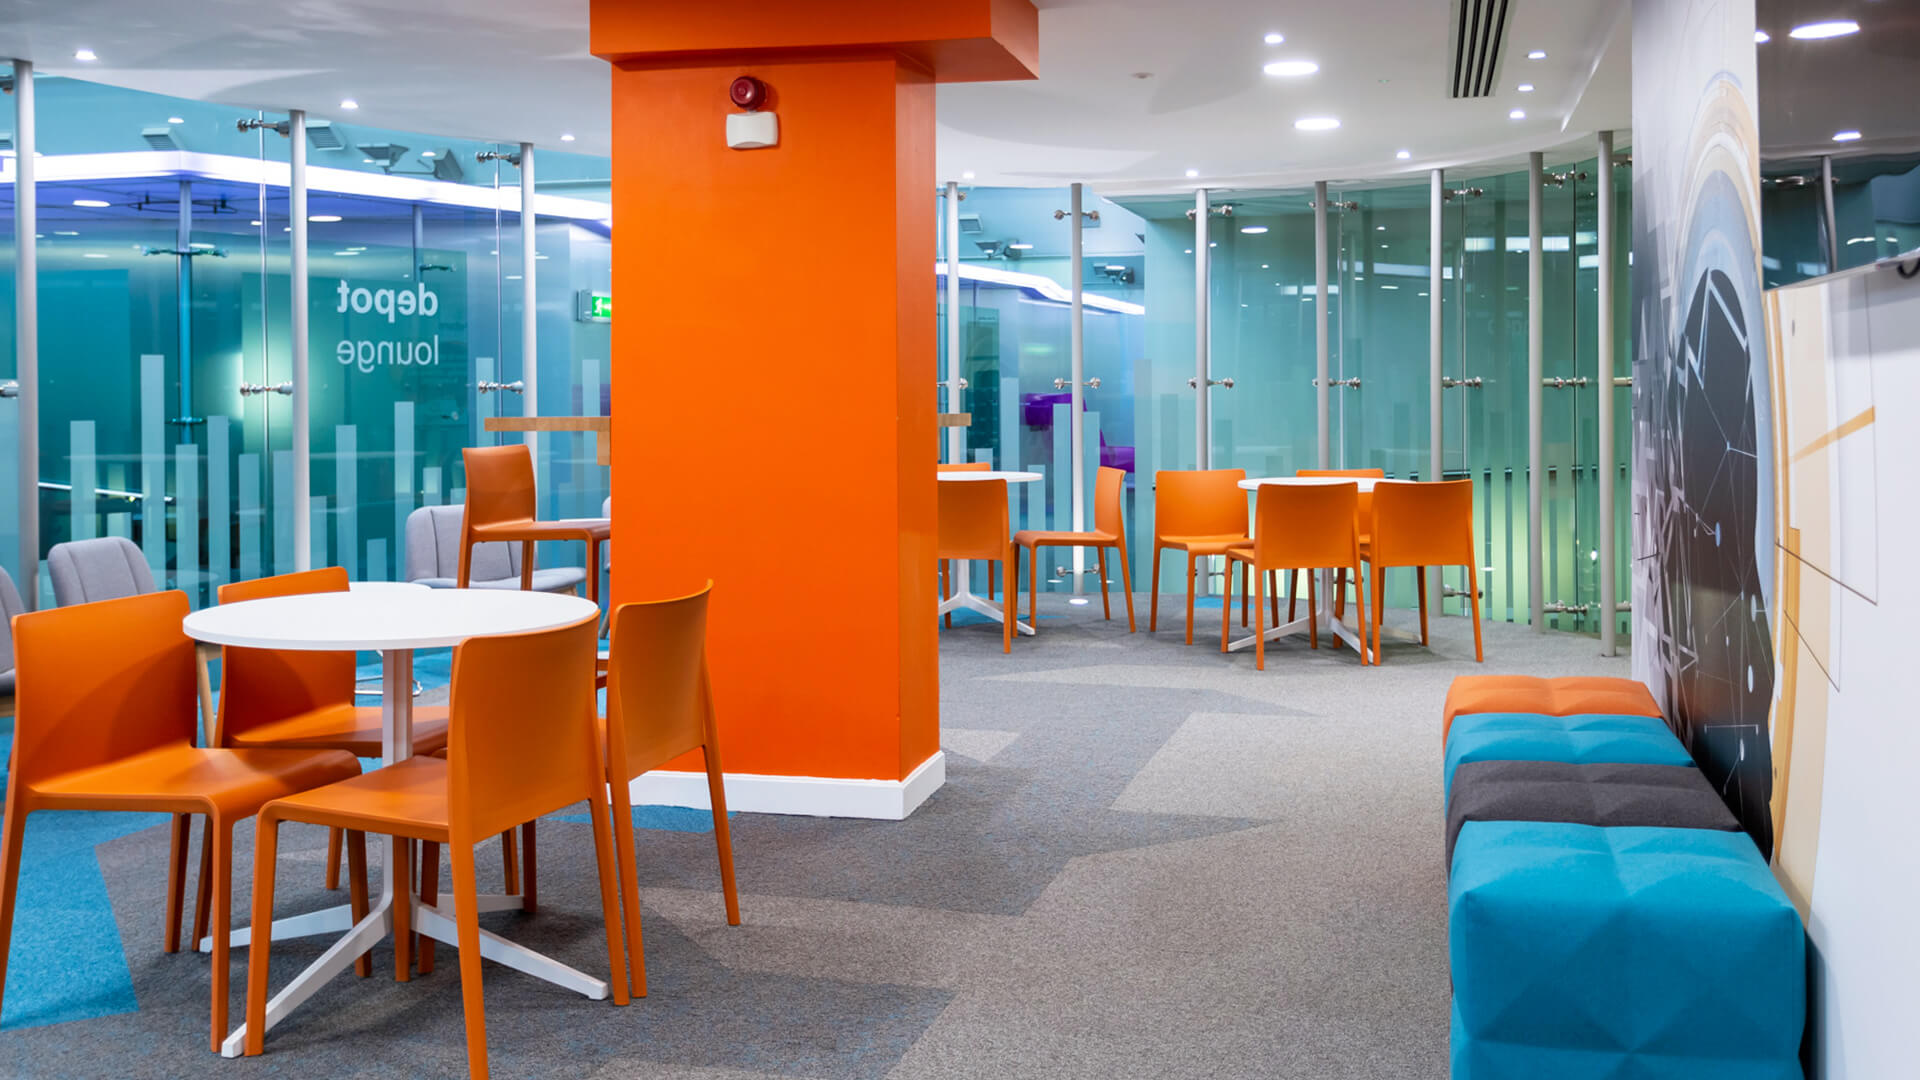 Orange chairs surround circular tables in the glass-walled Digital Depot lounge